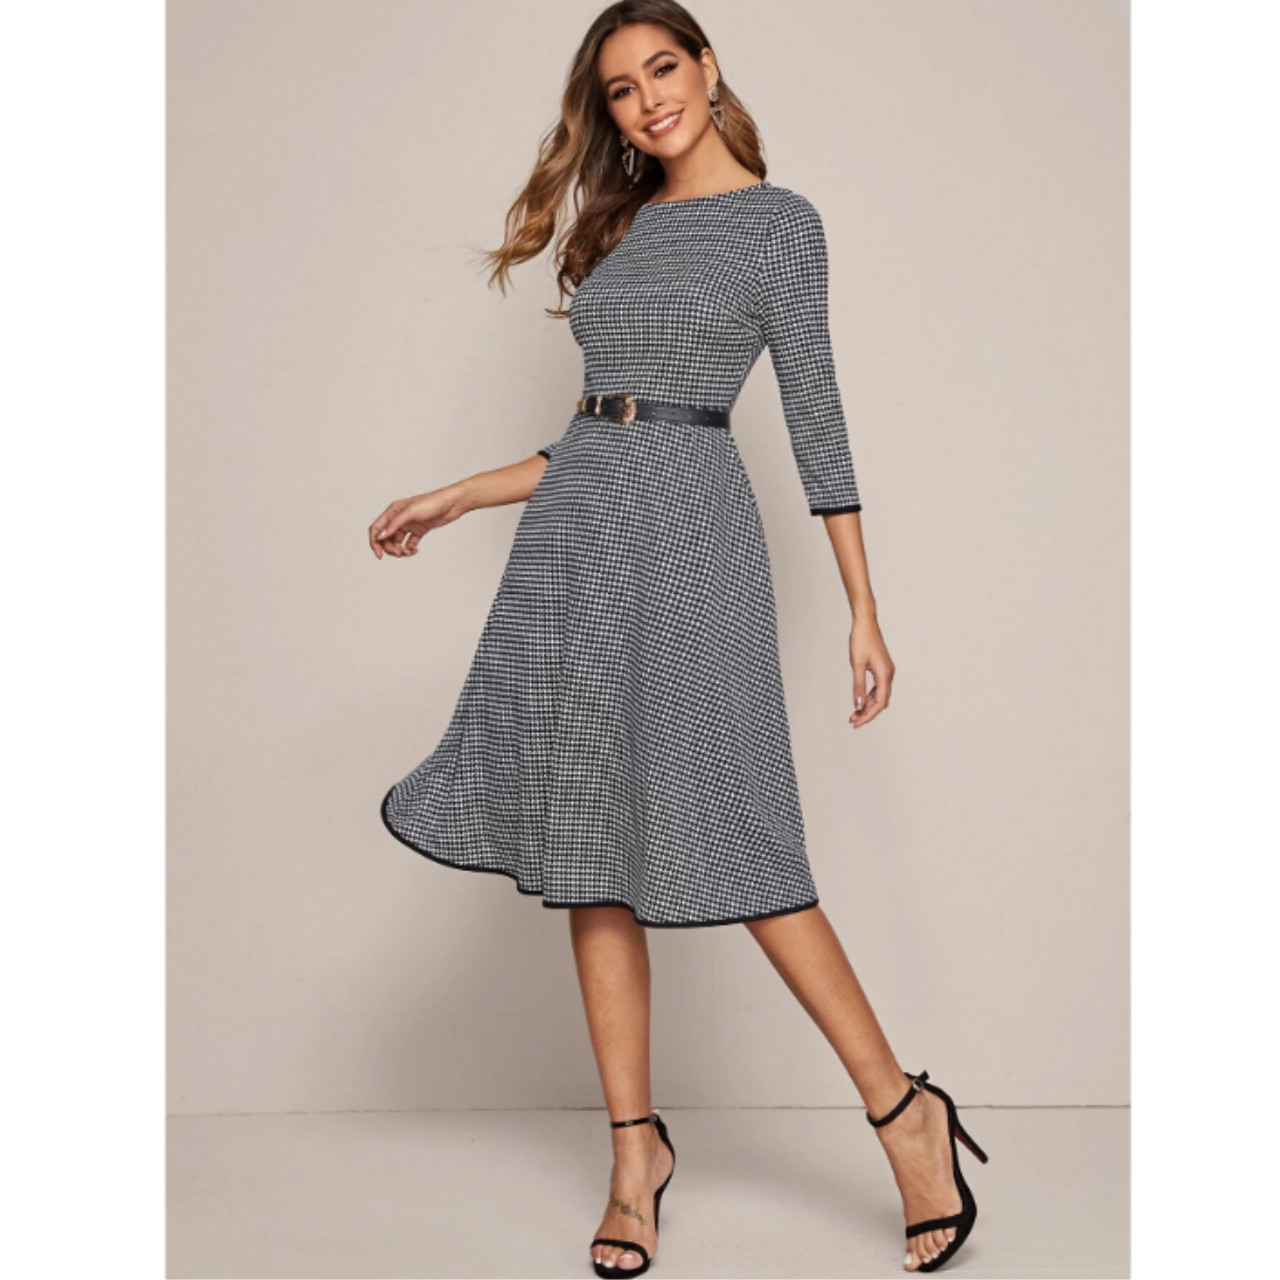 Binding detail houndstooth fit & flare dress l